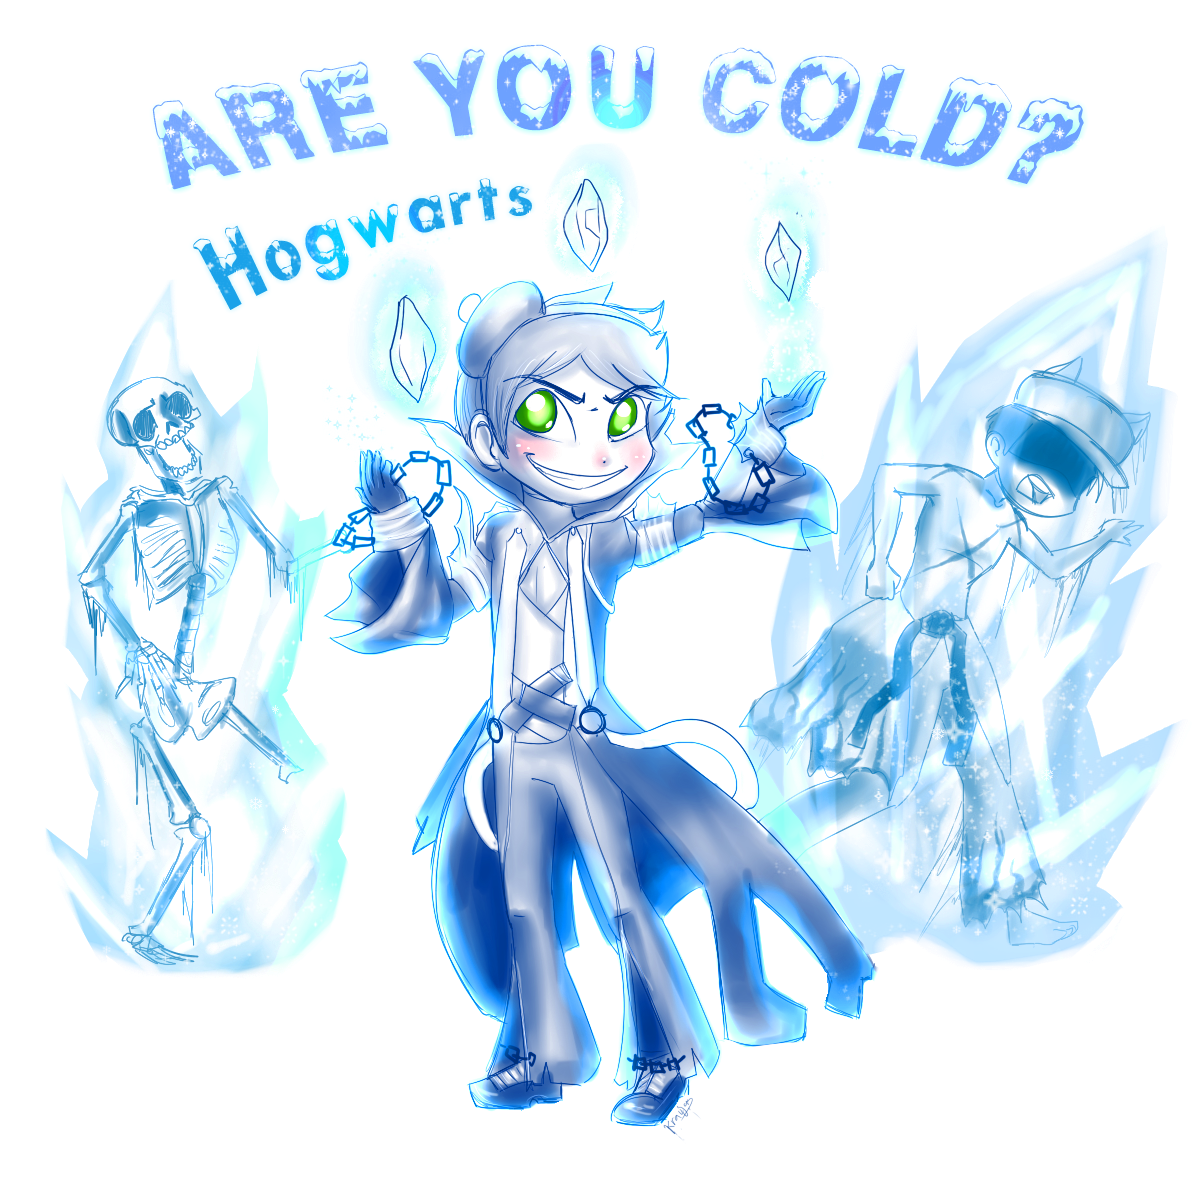 are_you_cold__by_gramotoons-d8of7jc.png